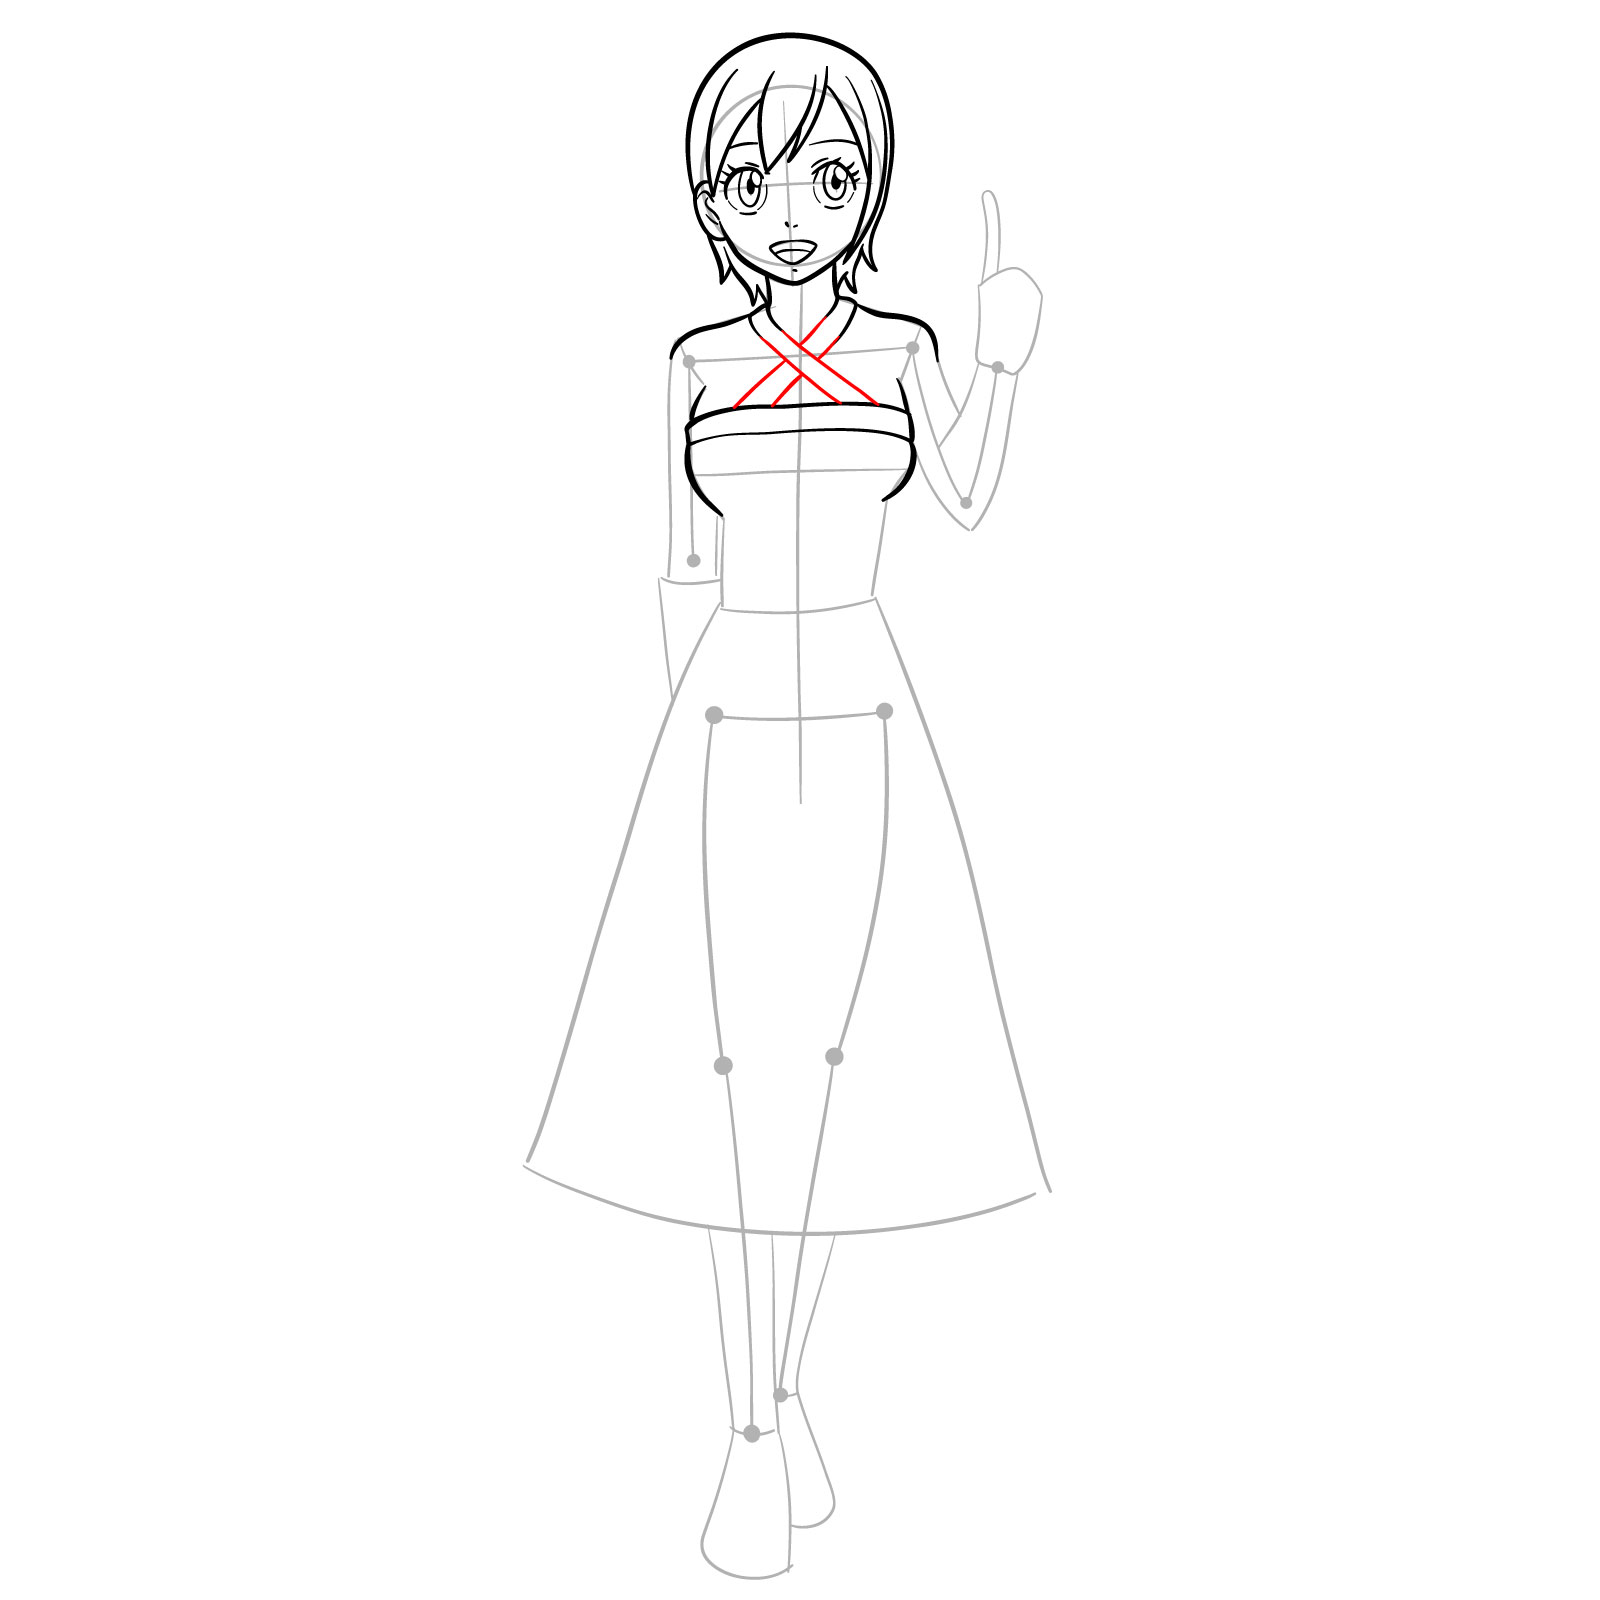 How to draw Lisanna Strauss from Fairy Tail - step 15